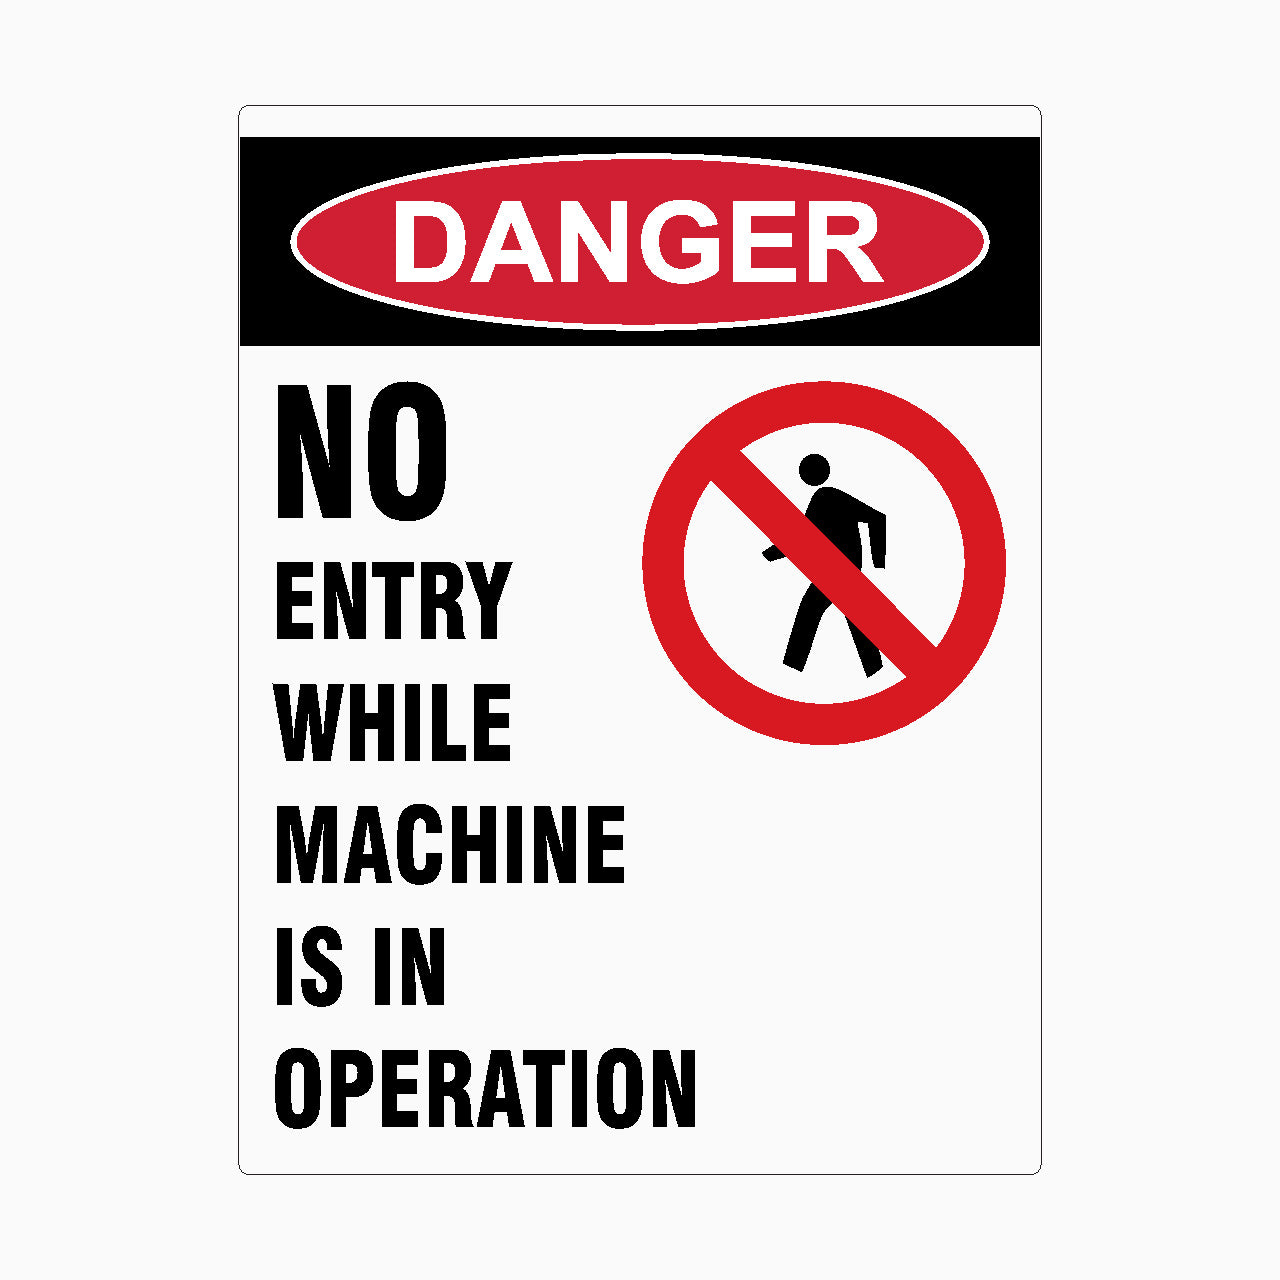 DANGER SIGN - NO ENTRY WHILE MACHINE IS IN OPERATION SIGN